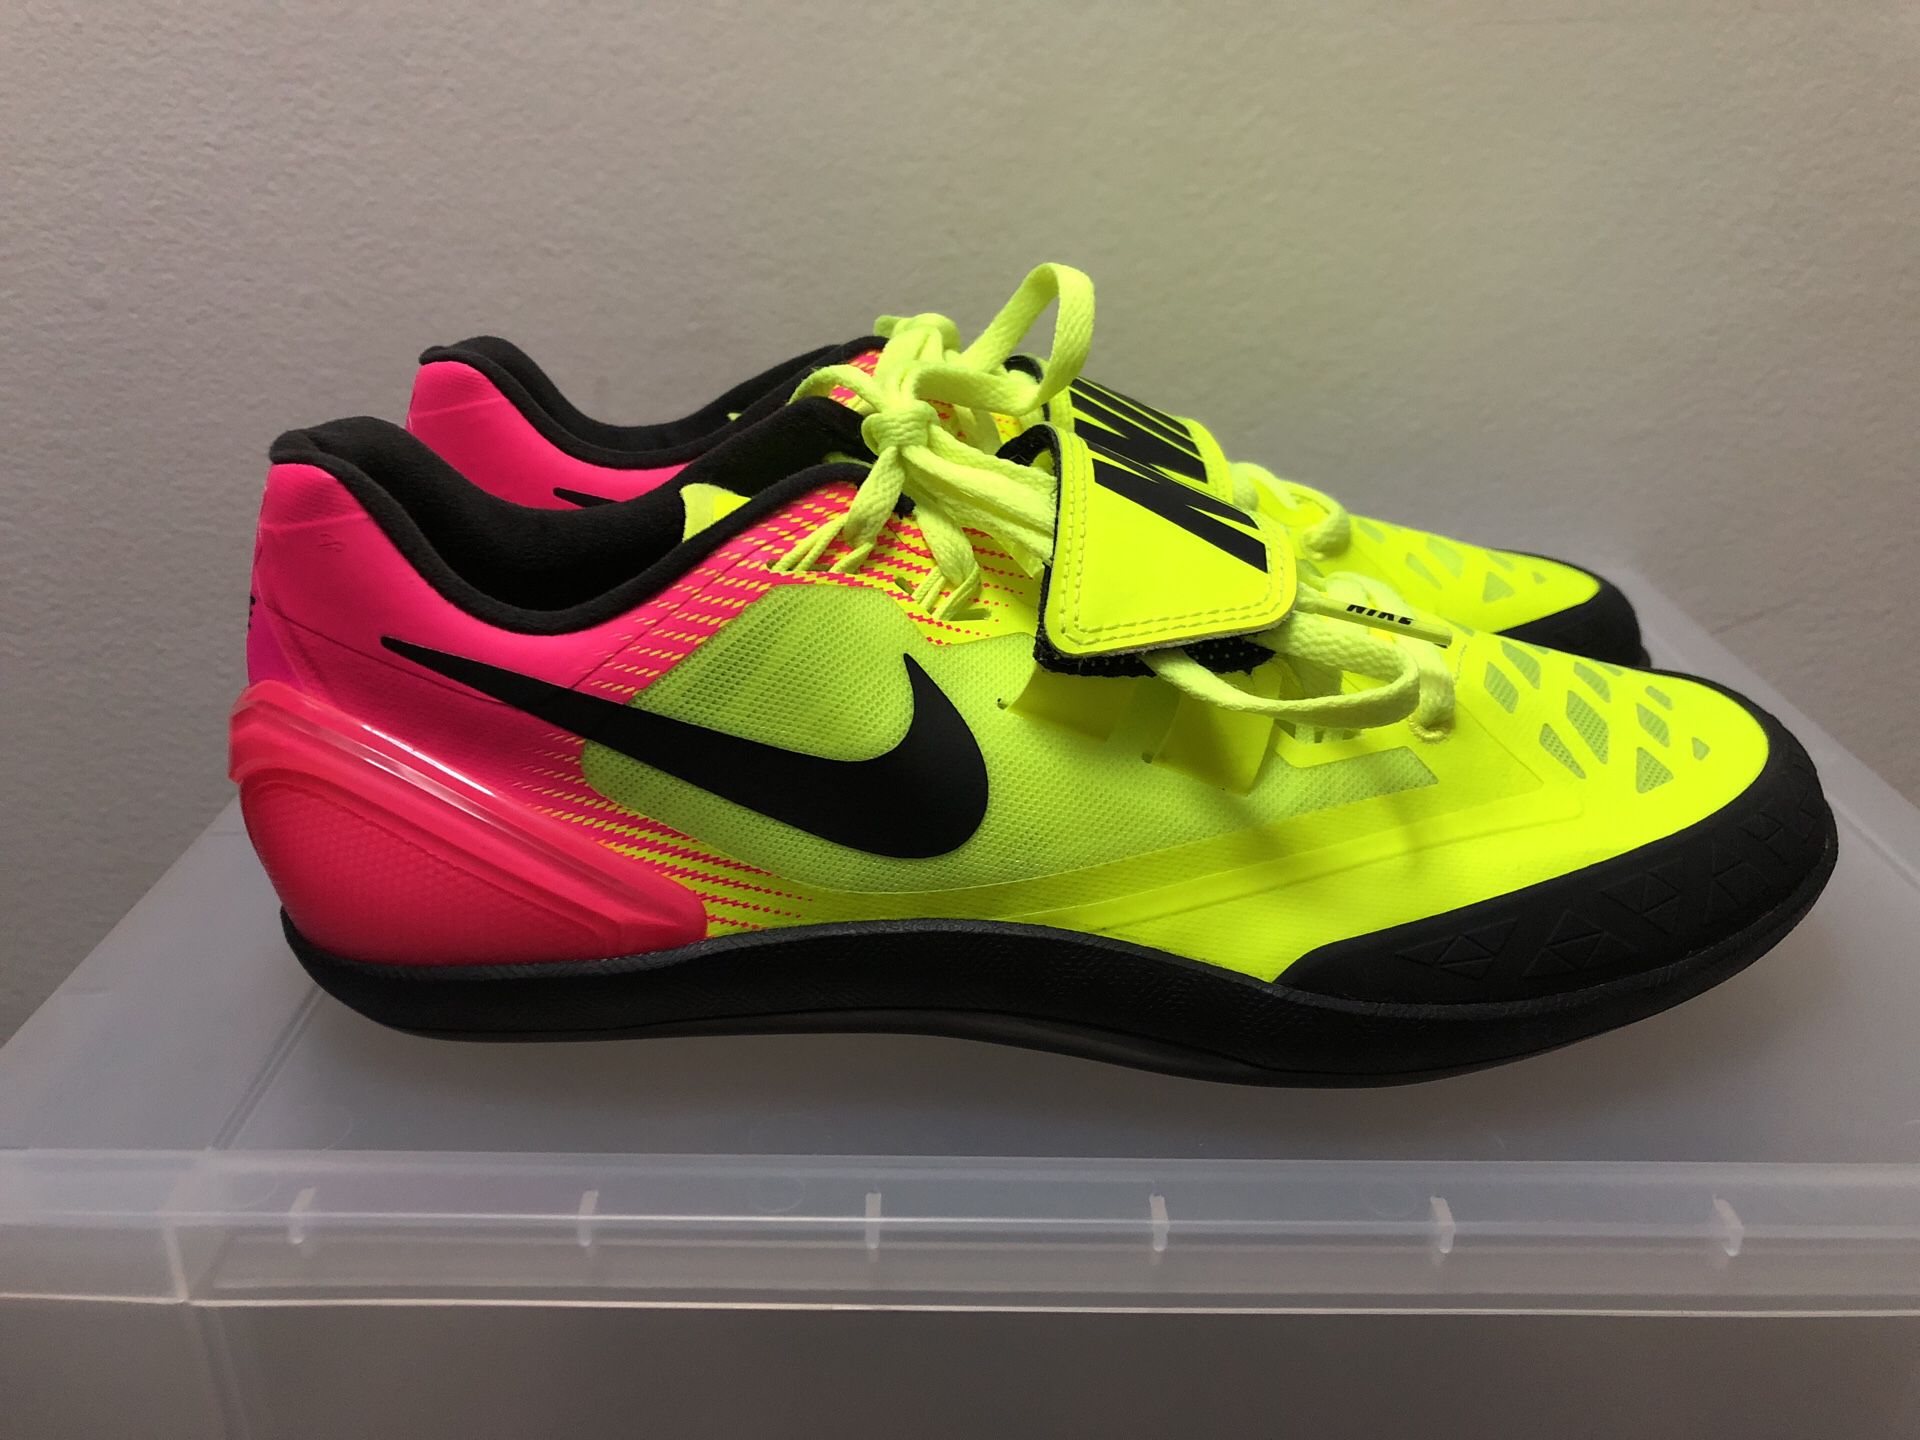 Nike Zoom Rotational 6 Shotput/Discus/Track 882009-999 Sz 8 for Sale in Coral Springs, FL - OfferUp